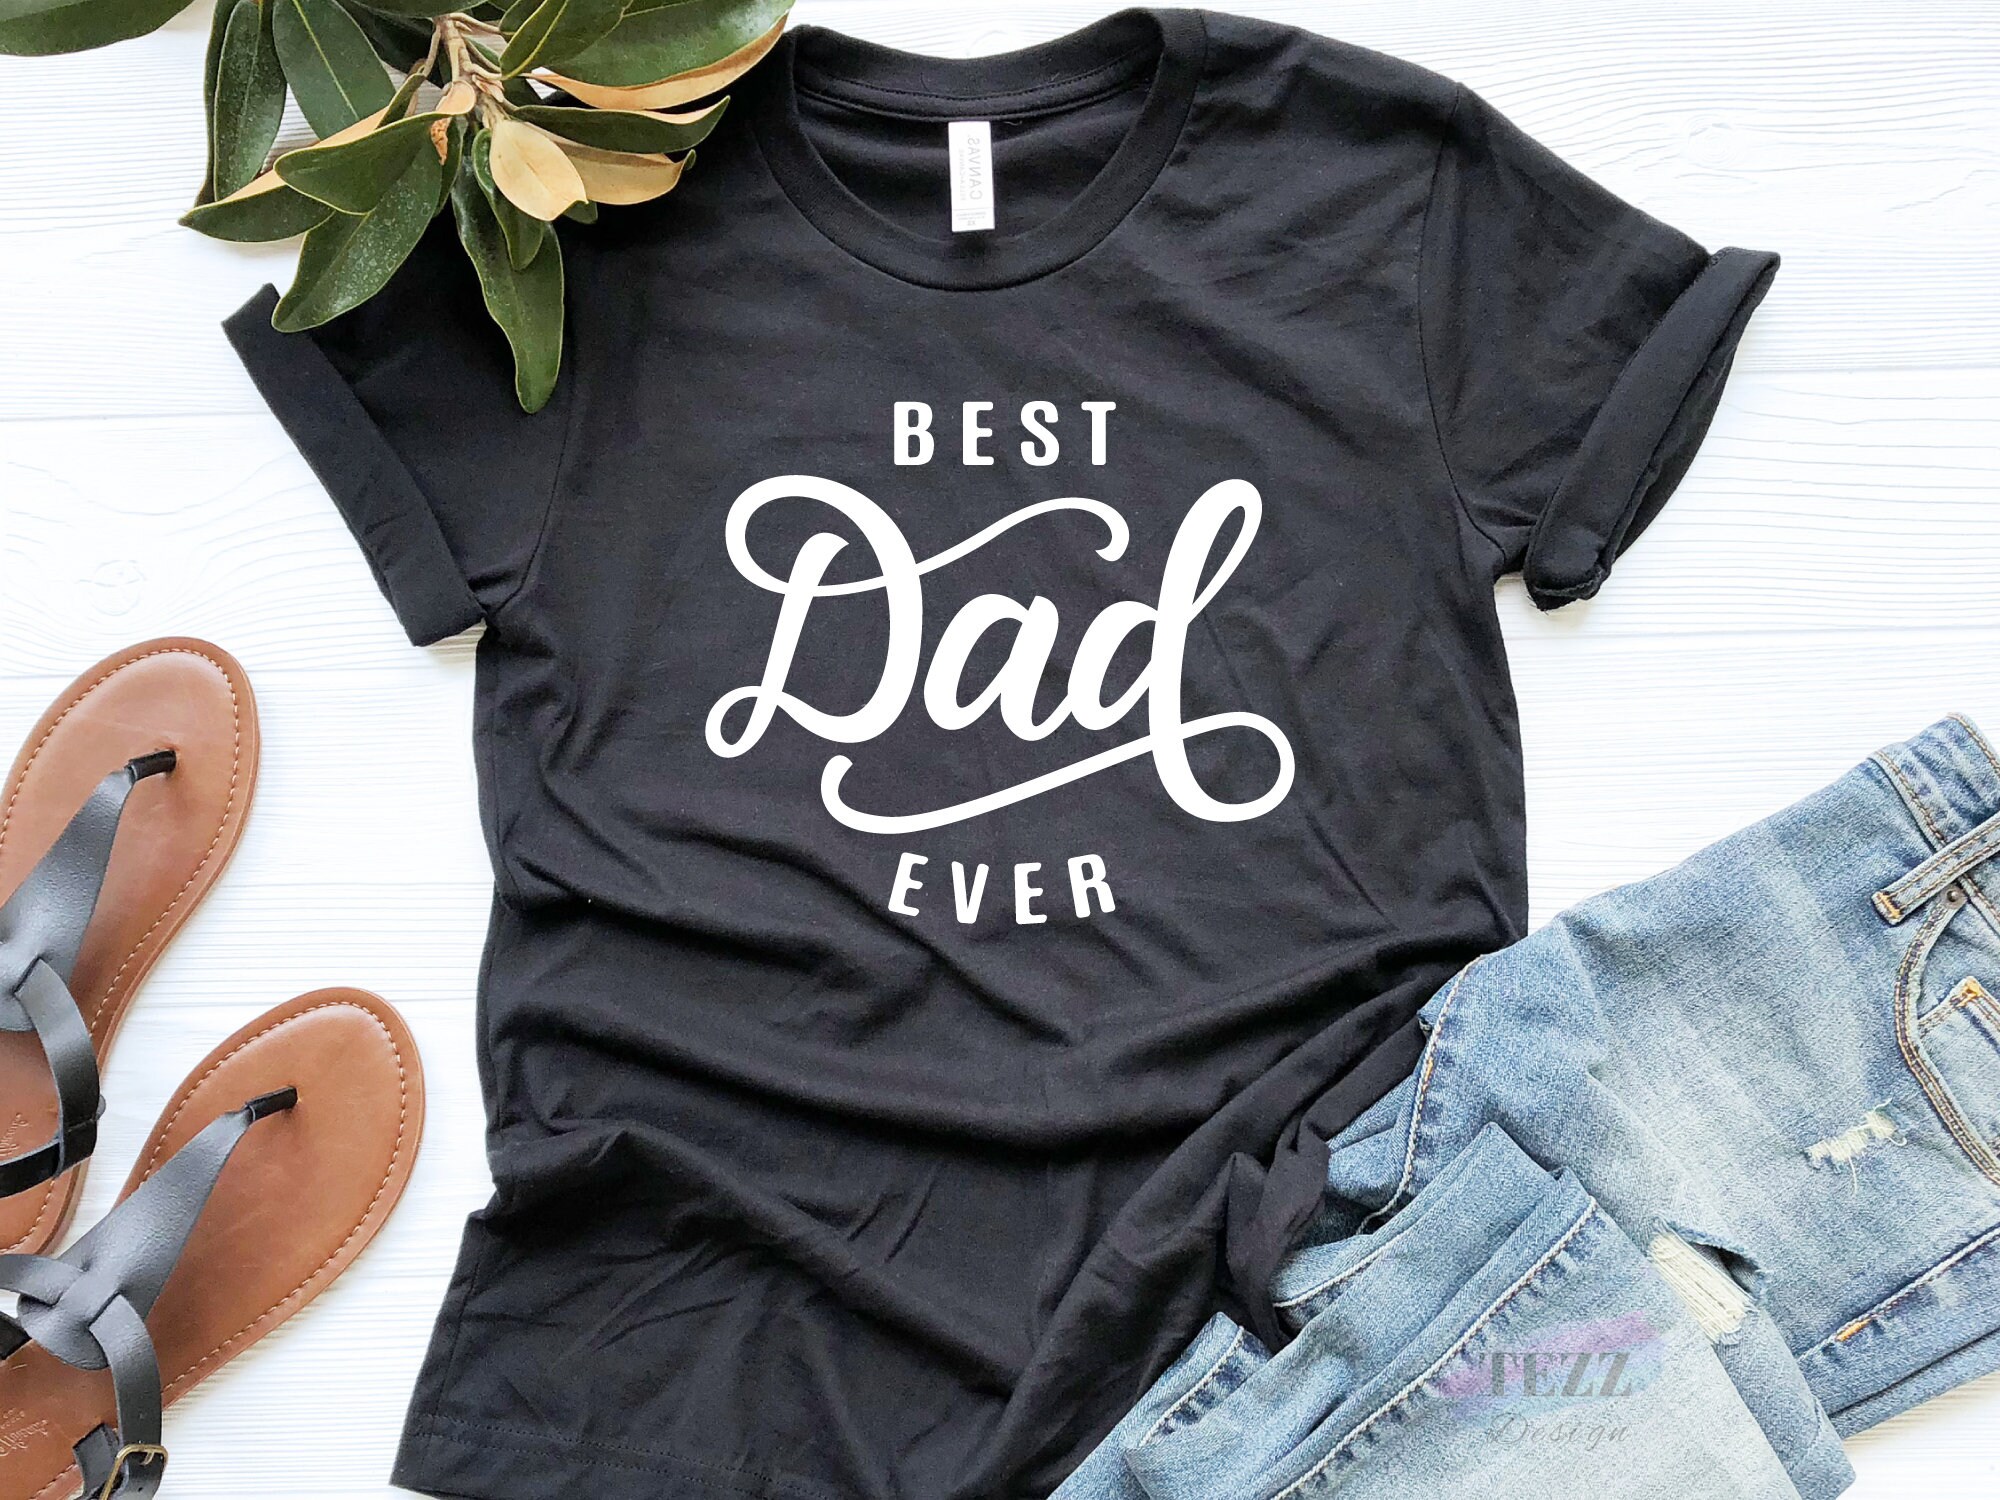 Best Dad Ever Shirt Dad Shirt Fathers Day Gift Gift for | Etsy